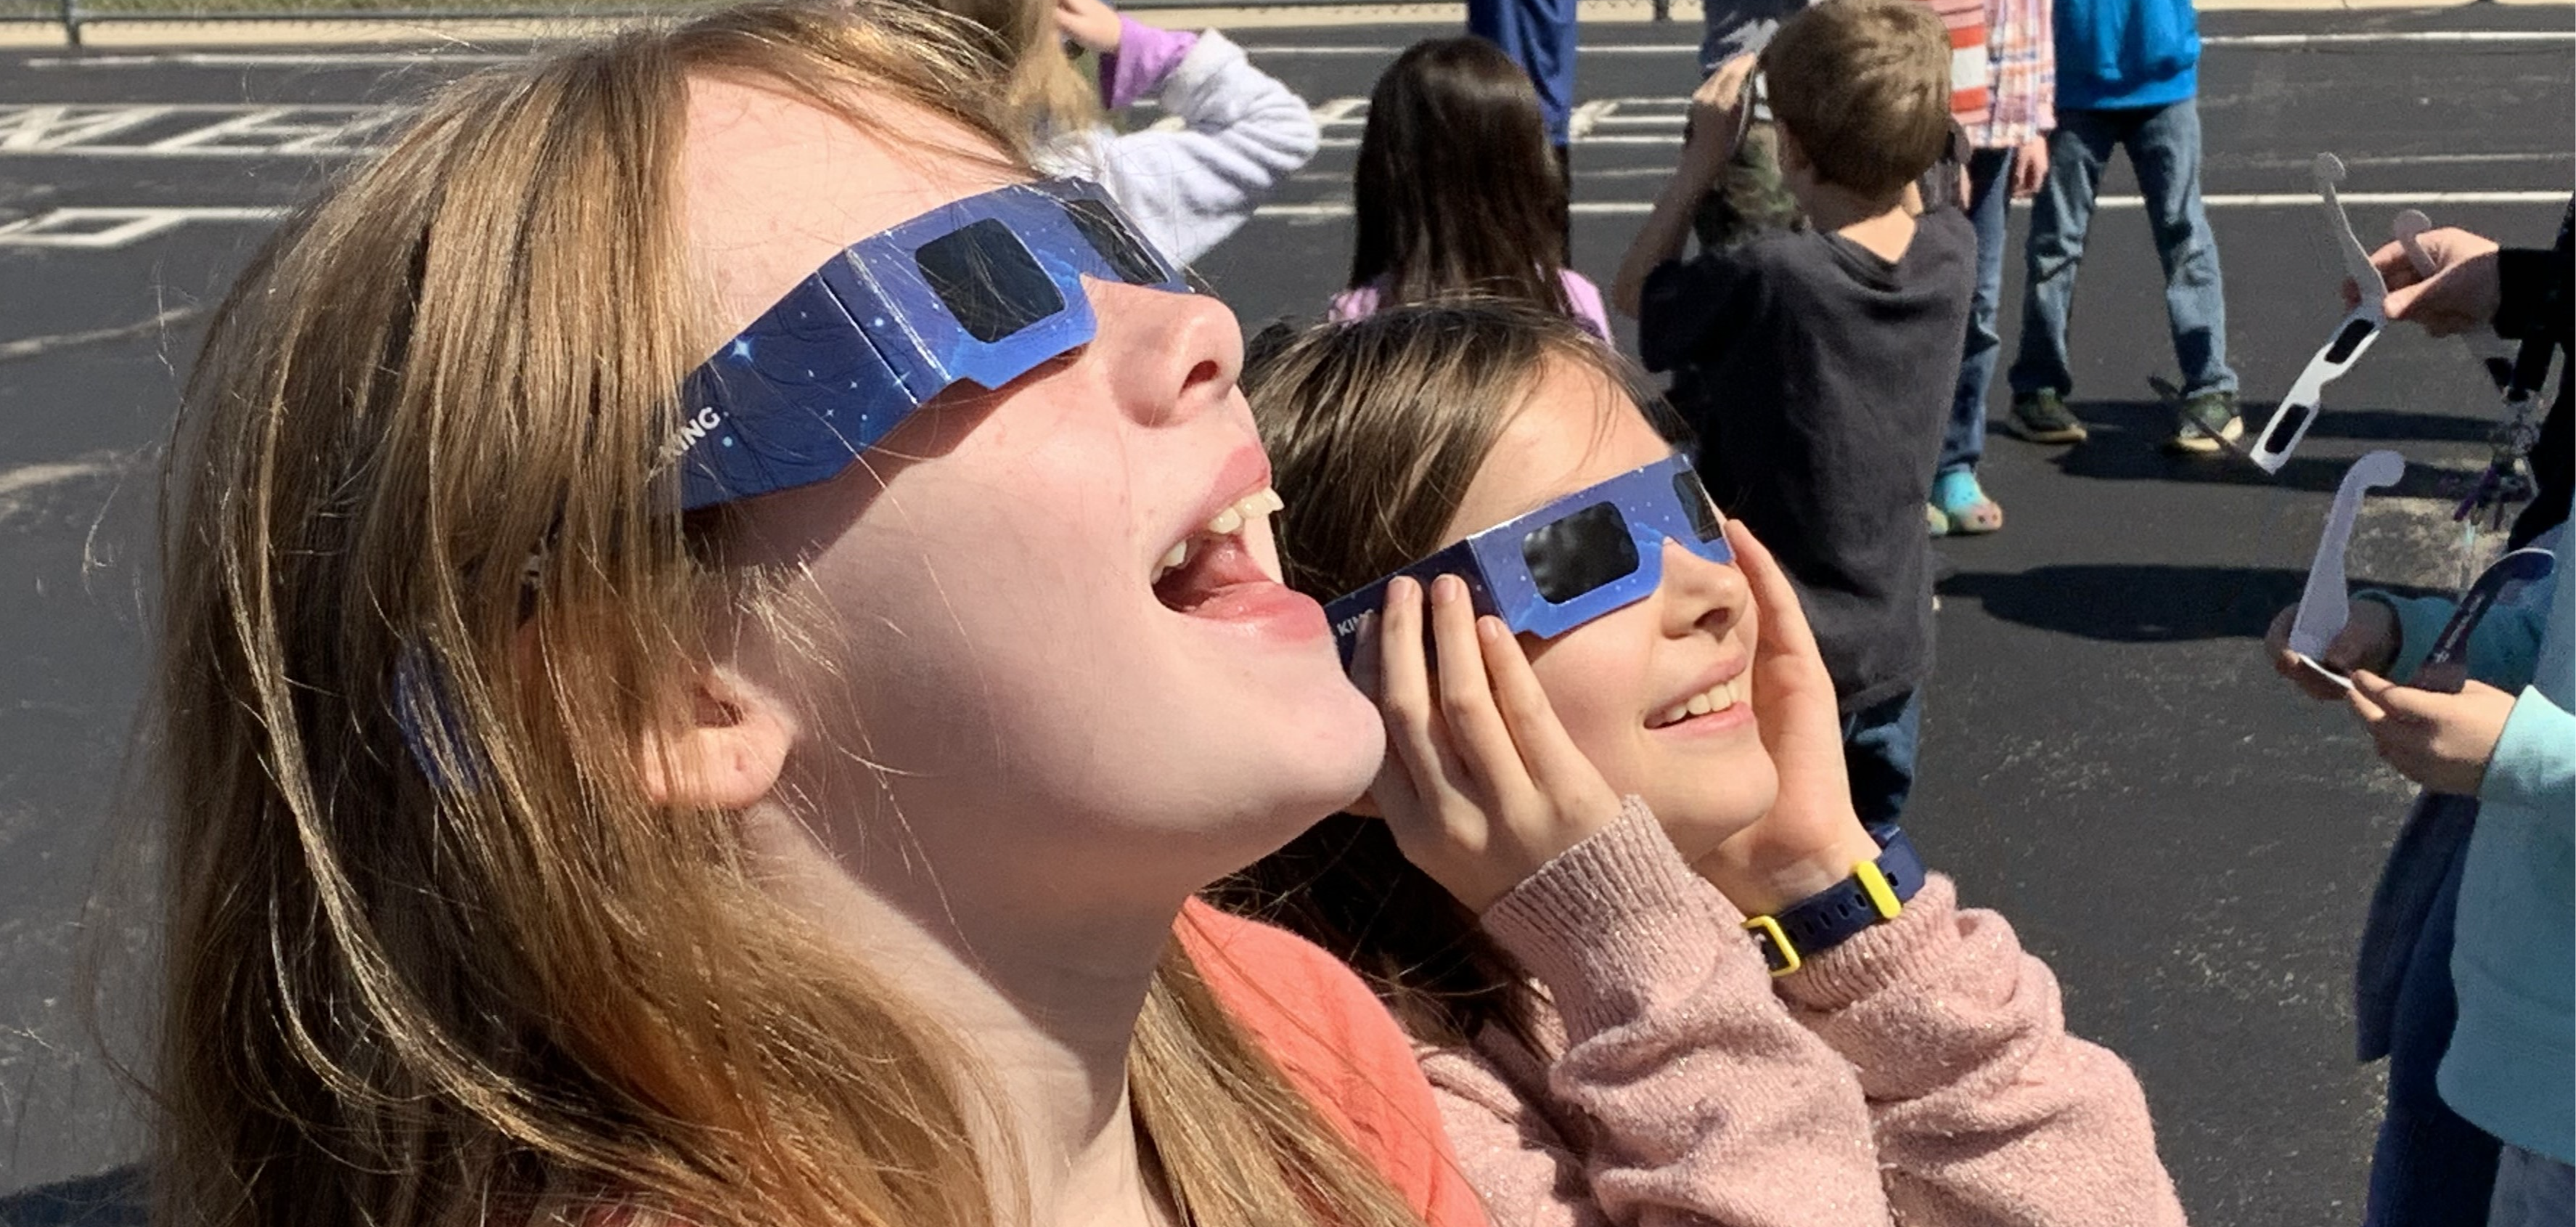 Lincoln kids with solar eclipse glasses on